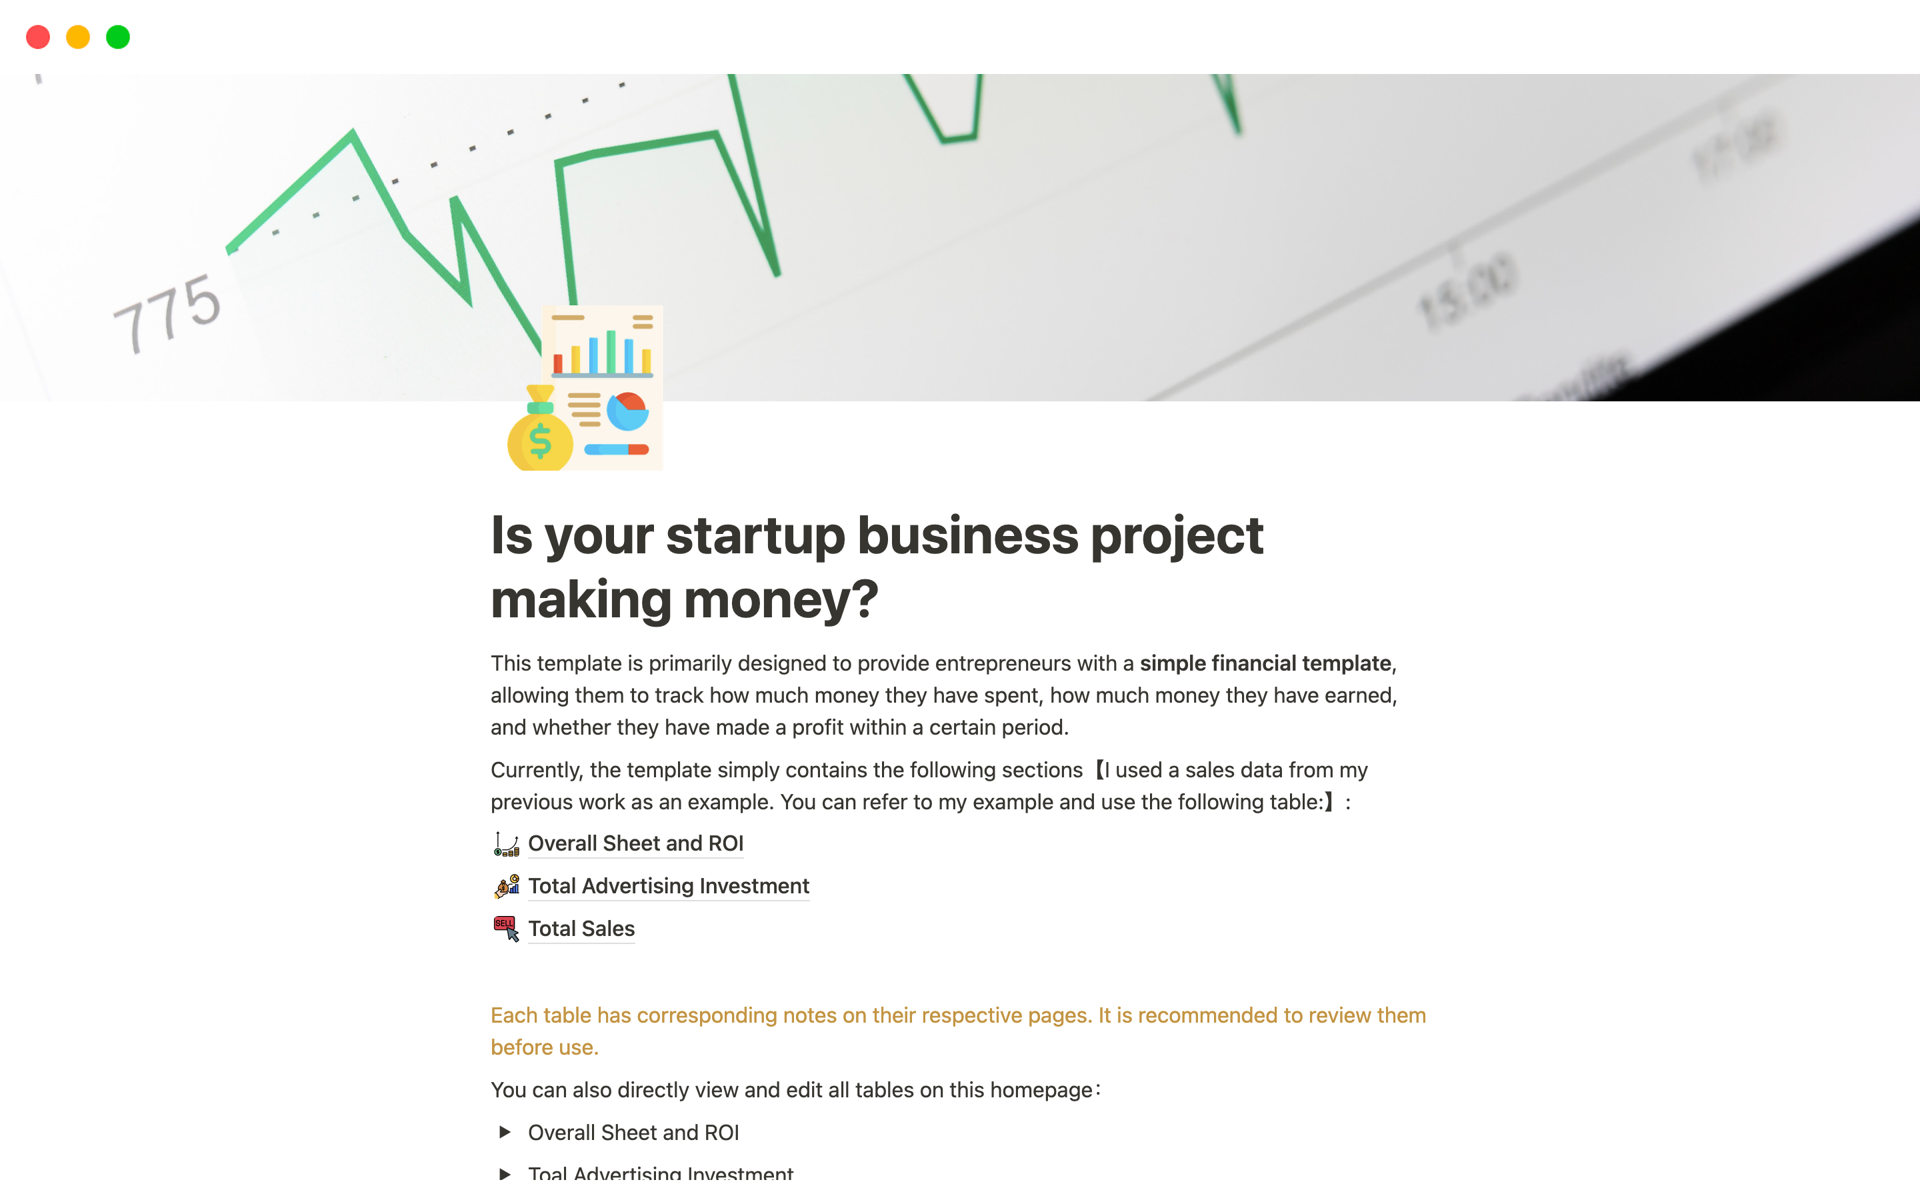 Don't you want to know if your entrepreneurial project is making money?